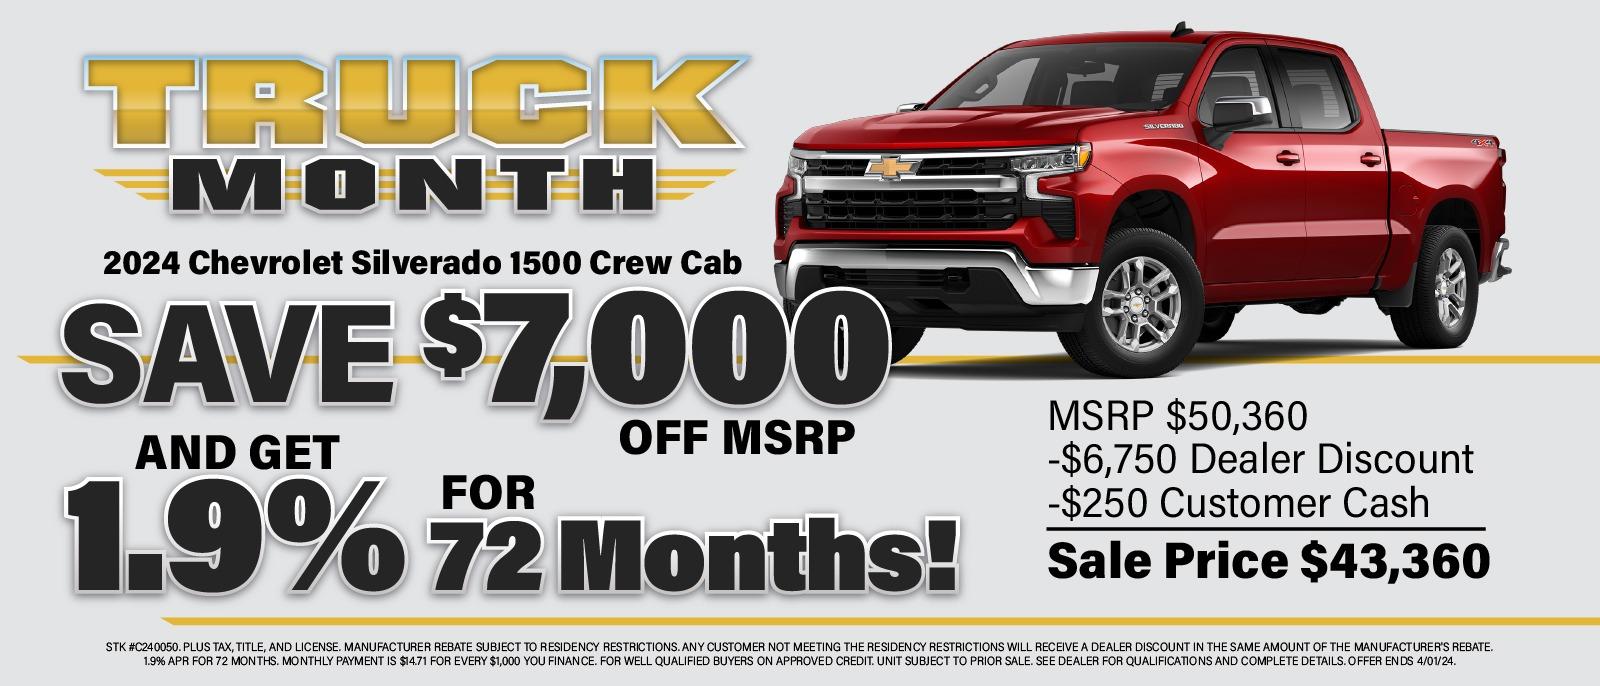 Truck Month 1.9% for 72 Months!